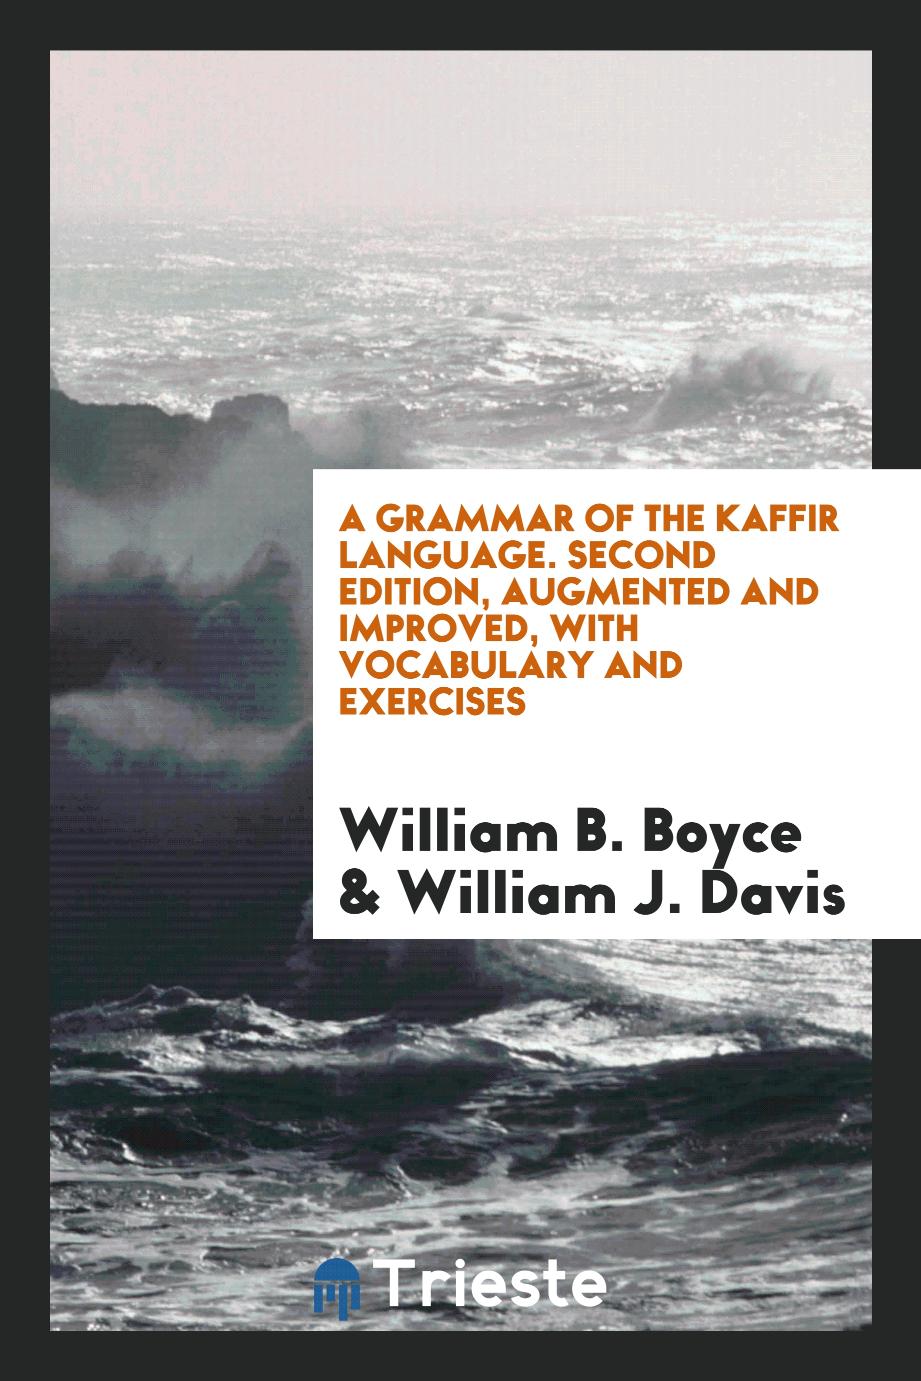 A Grammar of the Kaffir Language. Second Edition, Augmented and Improved, with Vocabulary and Exercises